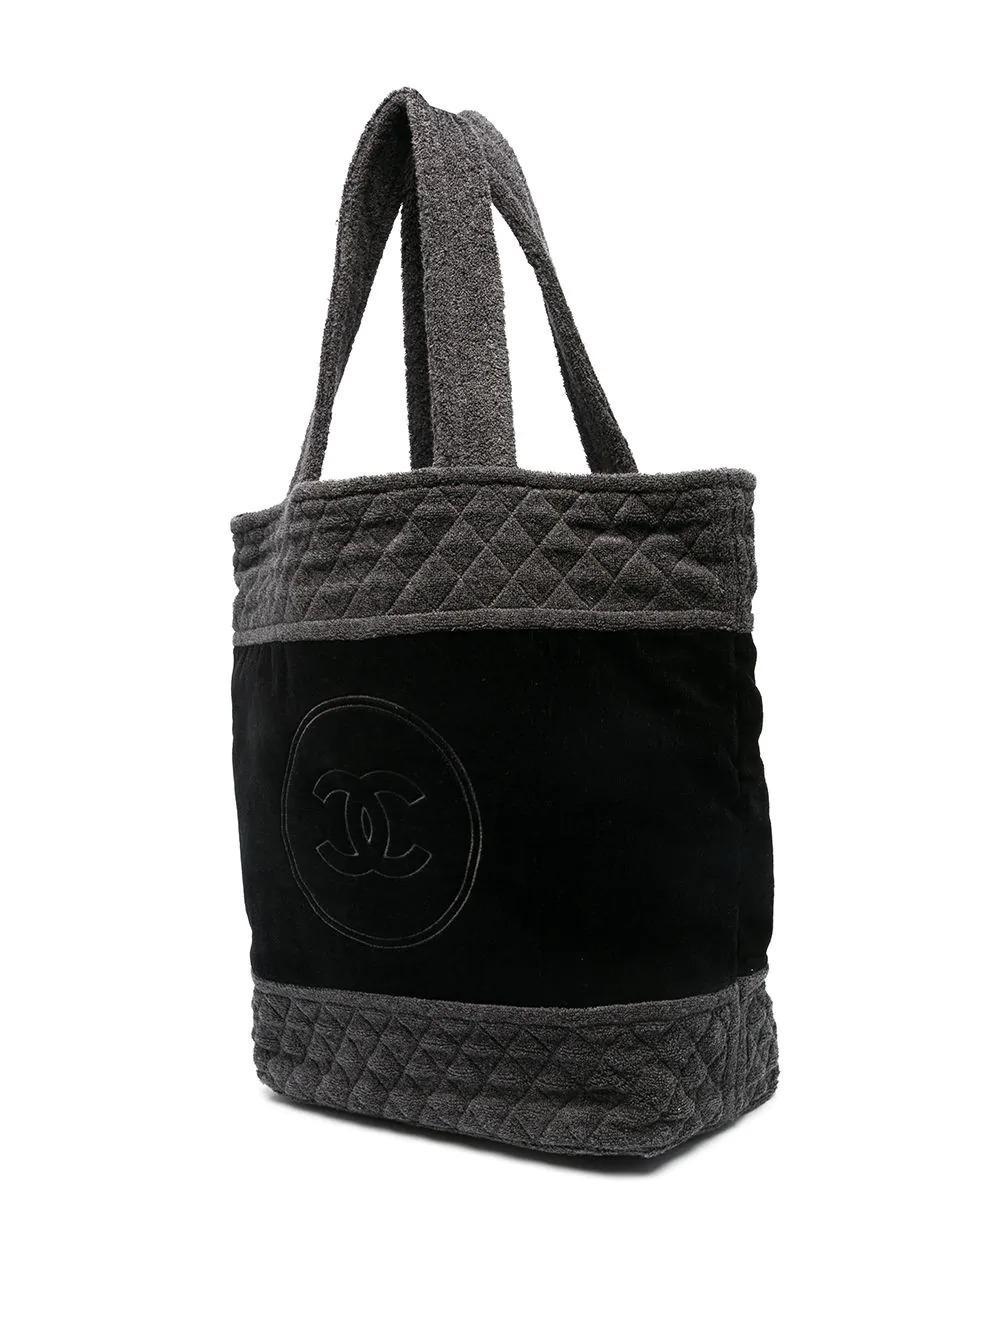 Rare Terry cotton beach bag from Chanel. Crafted from black and grey cotton, featuring the iconic diamond quilted pattern and a large interlocking CC logo across the front of the bag. 	

Colour: Black & Grey	

Material: Cotton	

Condition: 